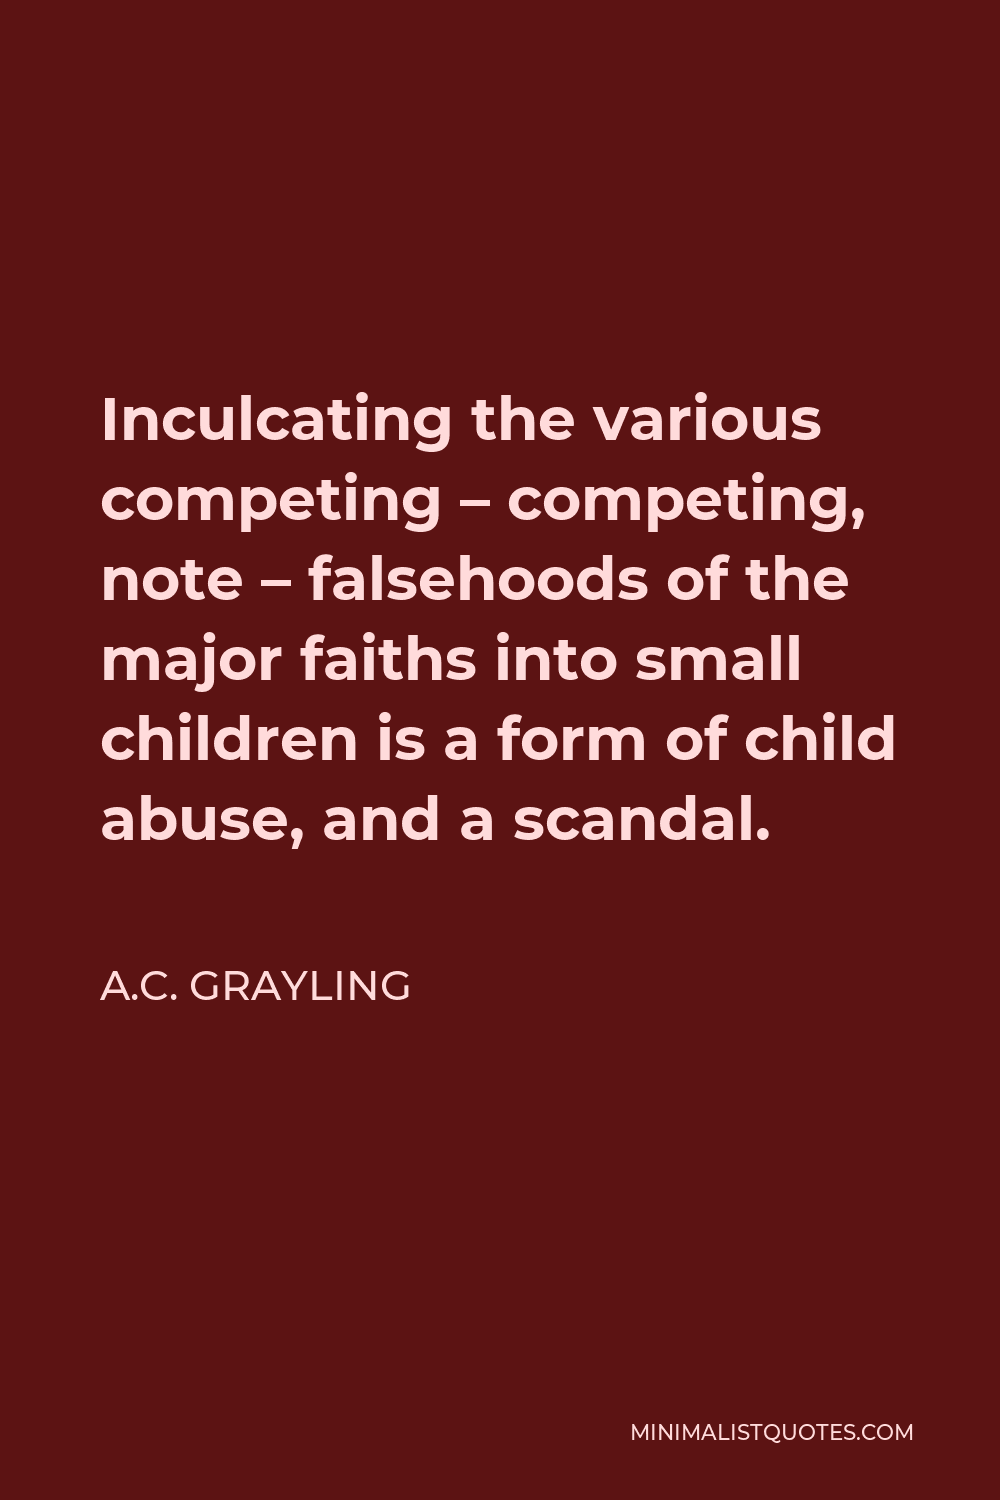 A.C. Grayling Quote - Inculcating the various competing – competing, note – falsehoods of the major faiths into small children is a form of child abuse, and a scandal.